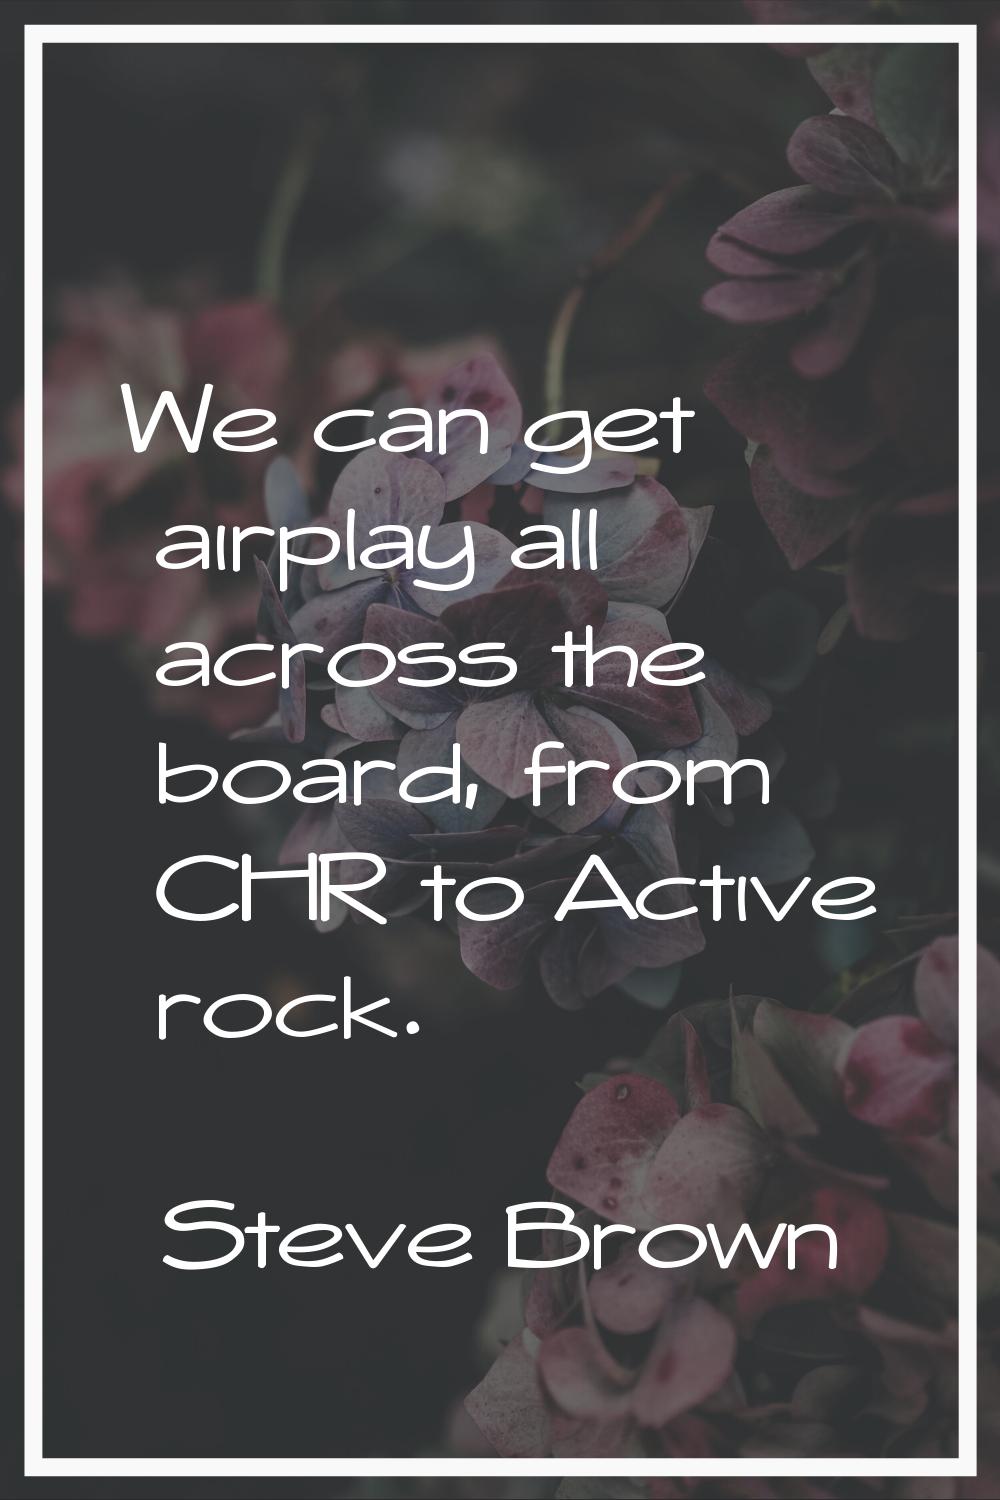 We can get airplay all across the board, from CHR to Active rock.